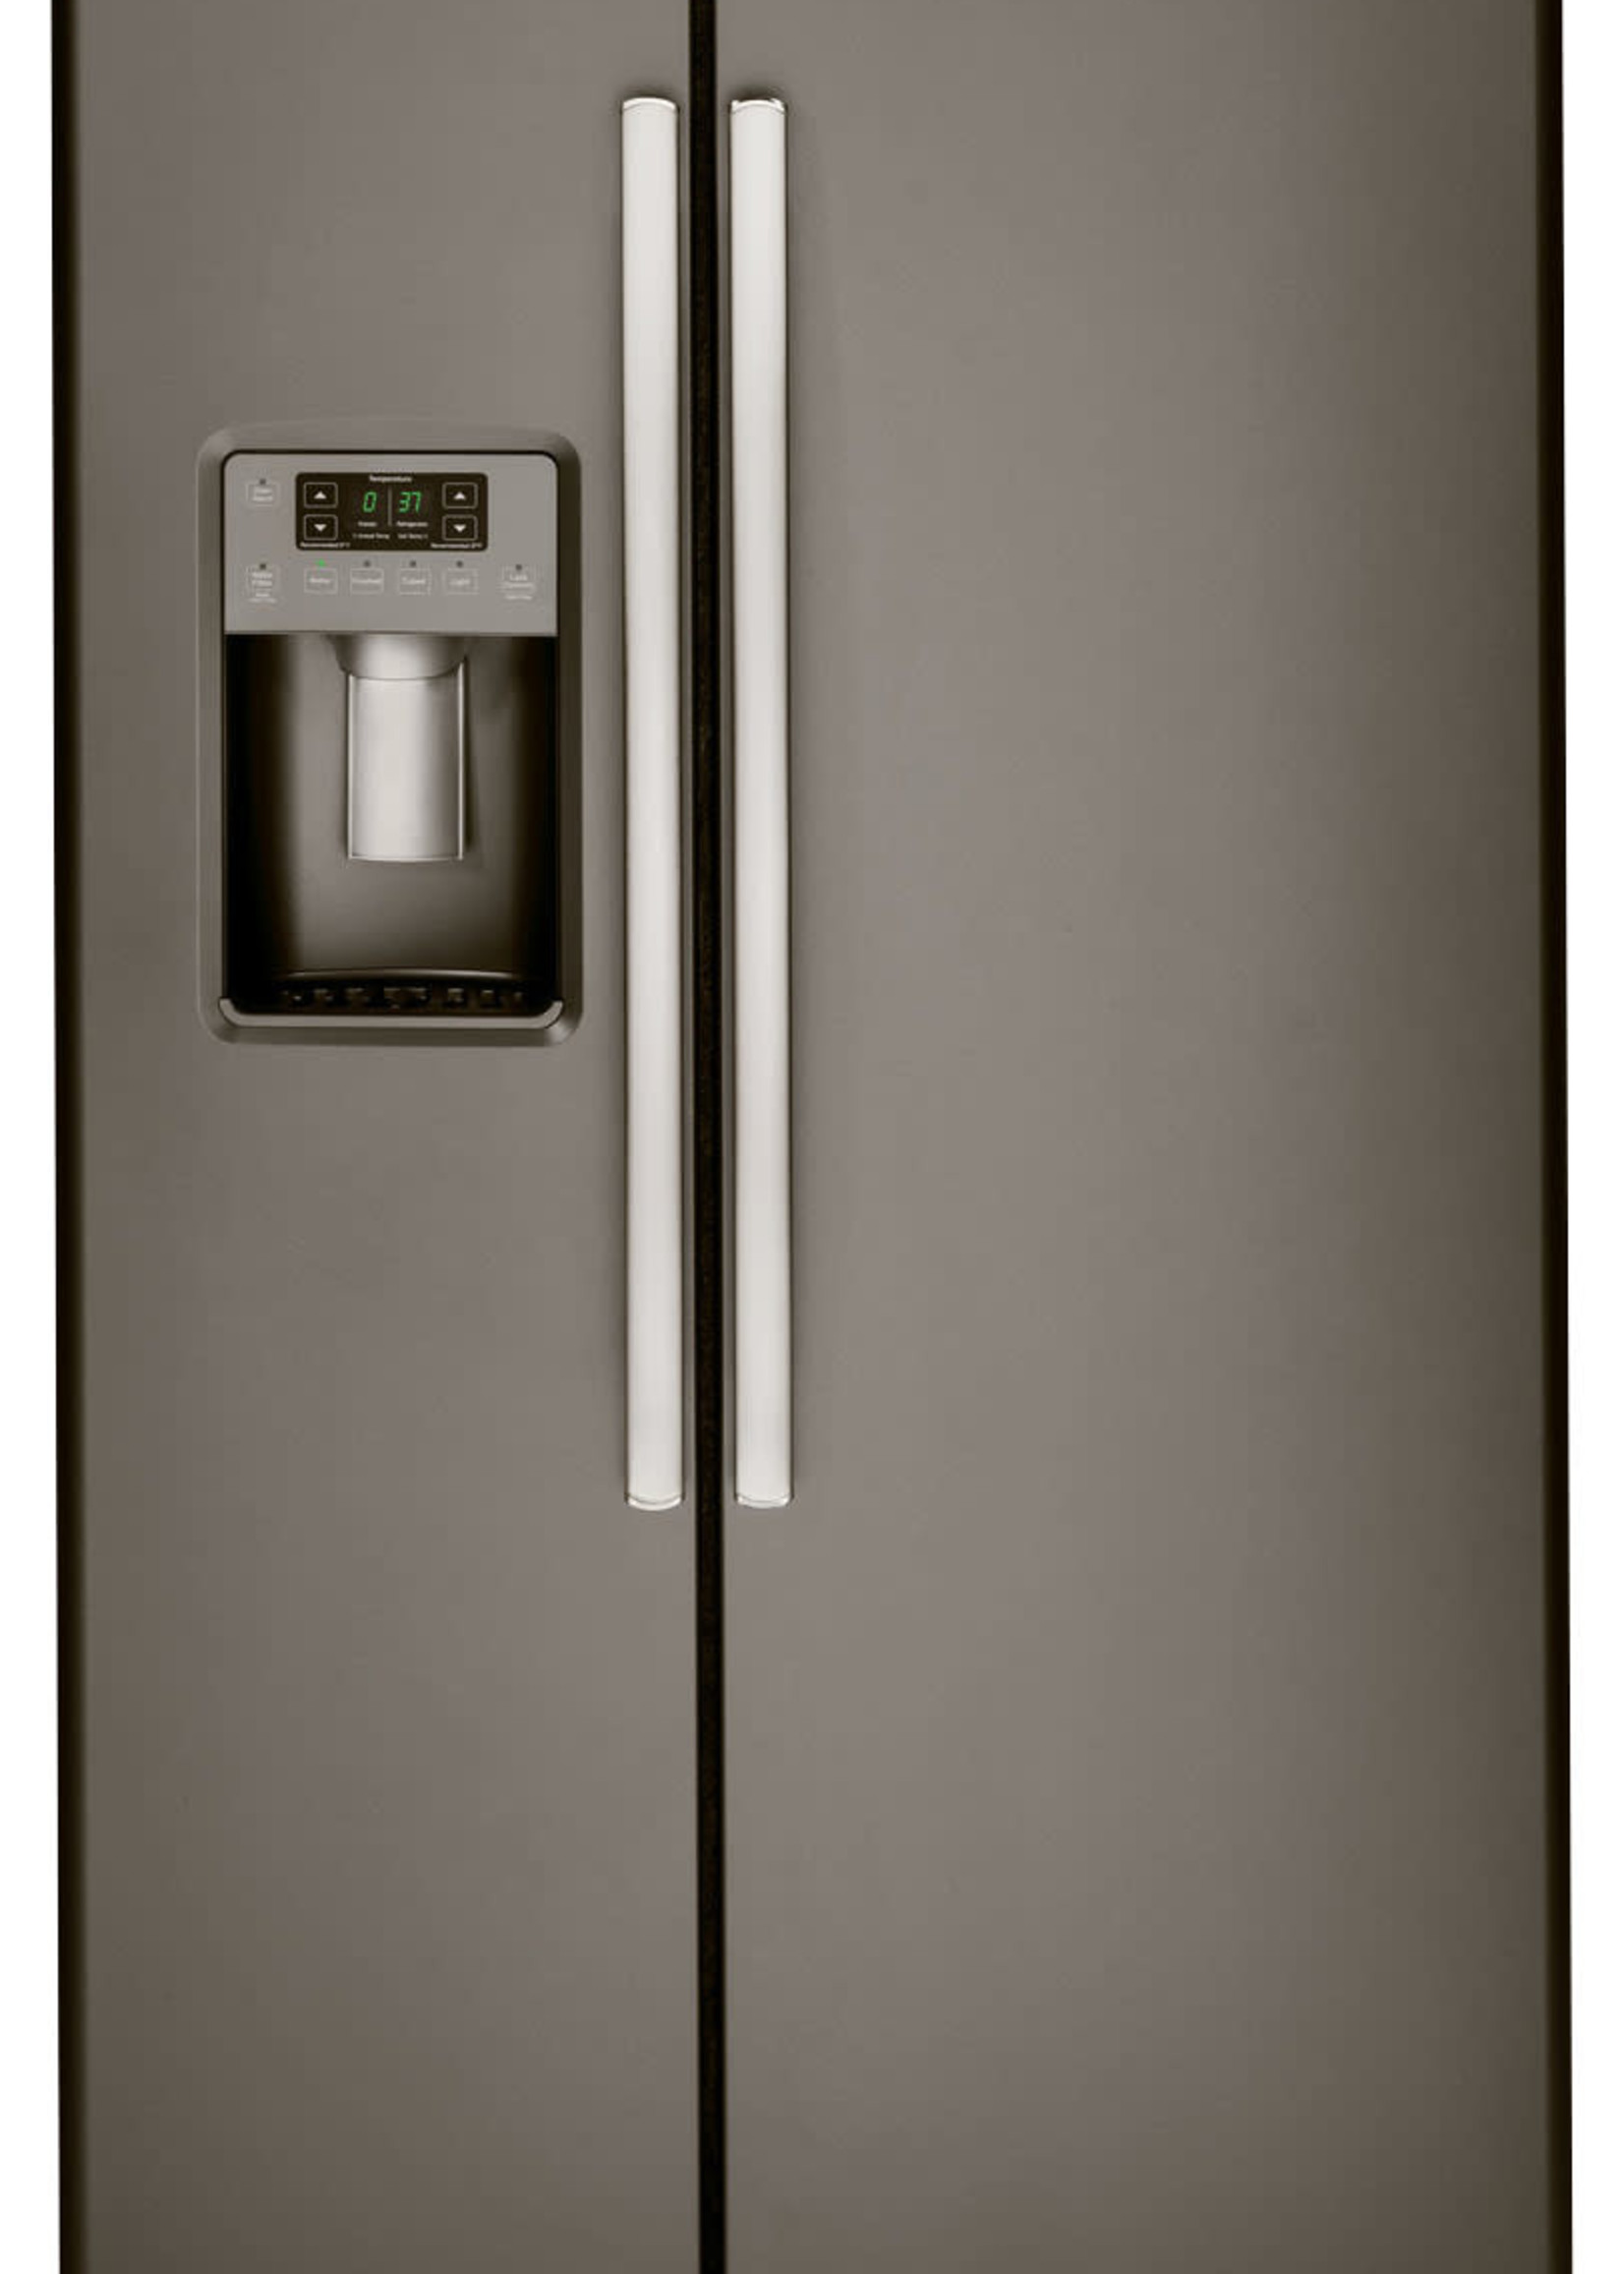 GE GSS25GMHES 25.3 Cu. Ft. Side-by-Side Refrigerator with External Ice & Water Dispenser - Fingerprint resistant slate